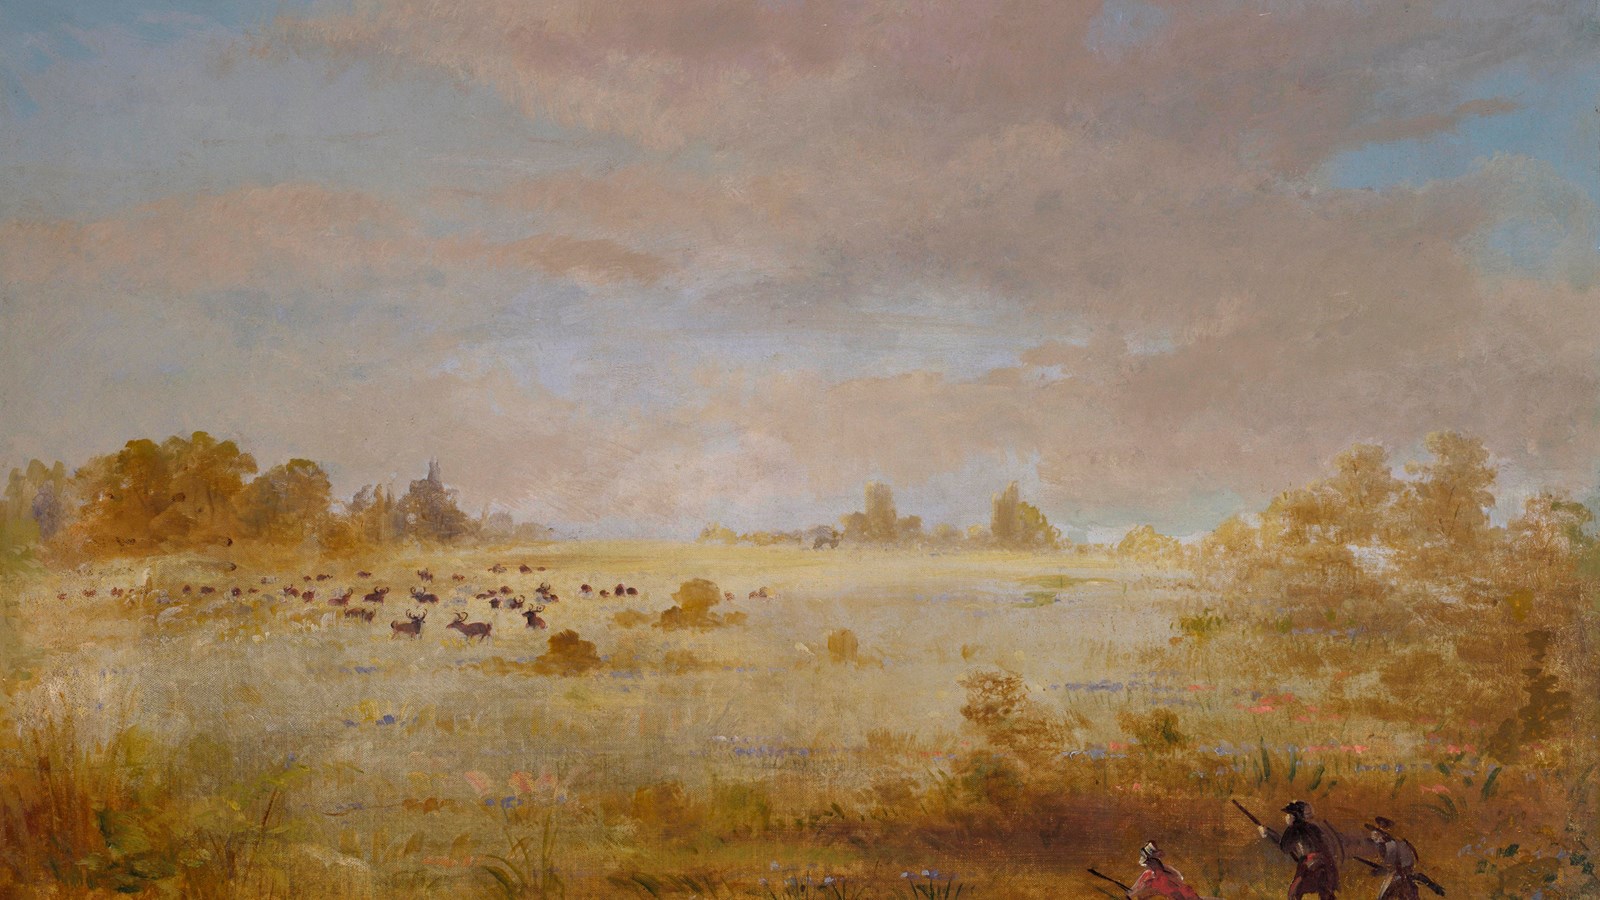 Painting of grassy plain, surrounded by trees, with herd of elk in the distance. Three hunters 